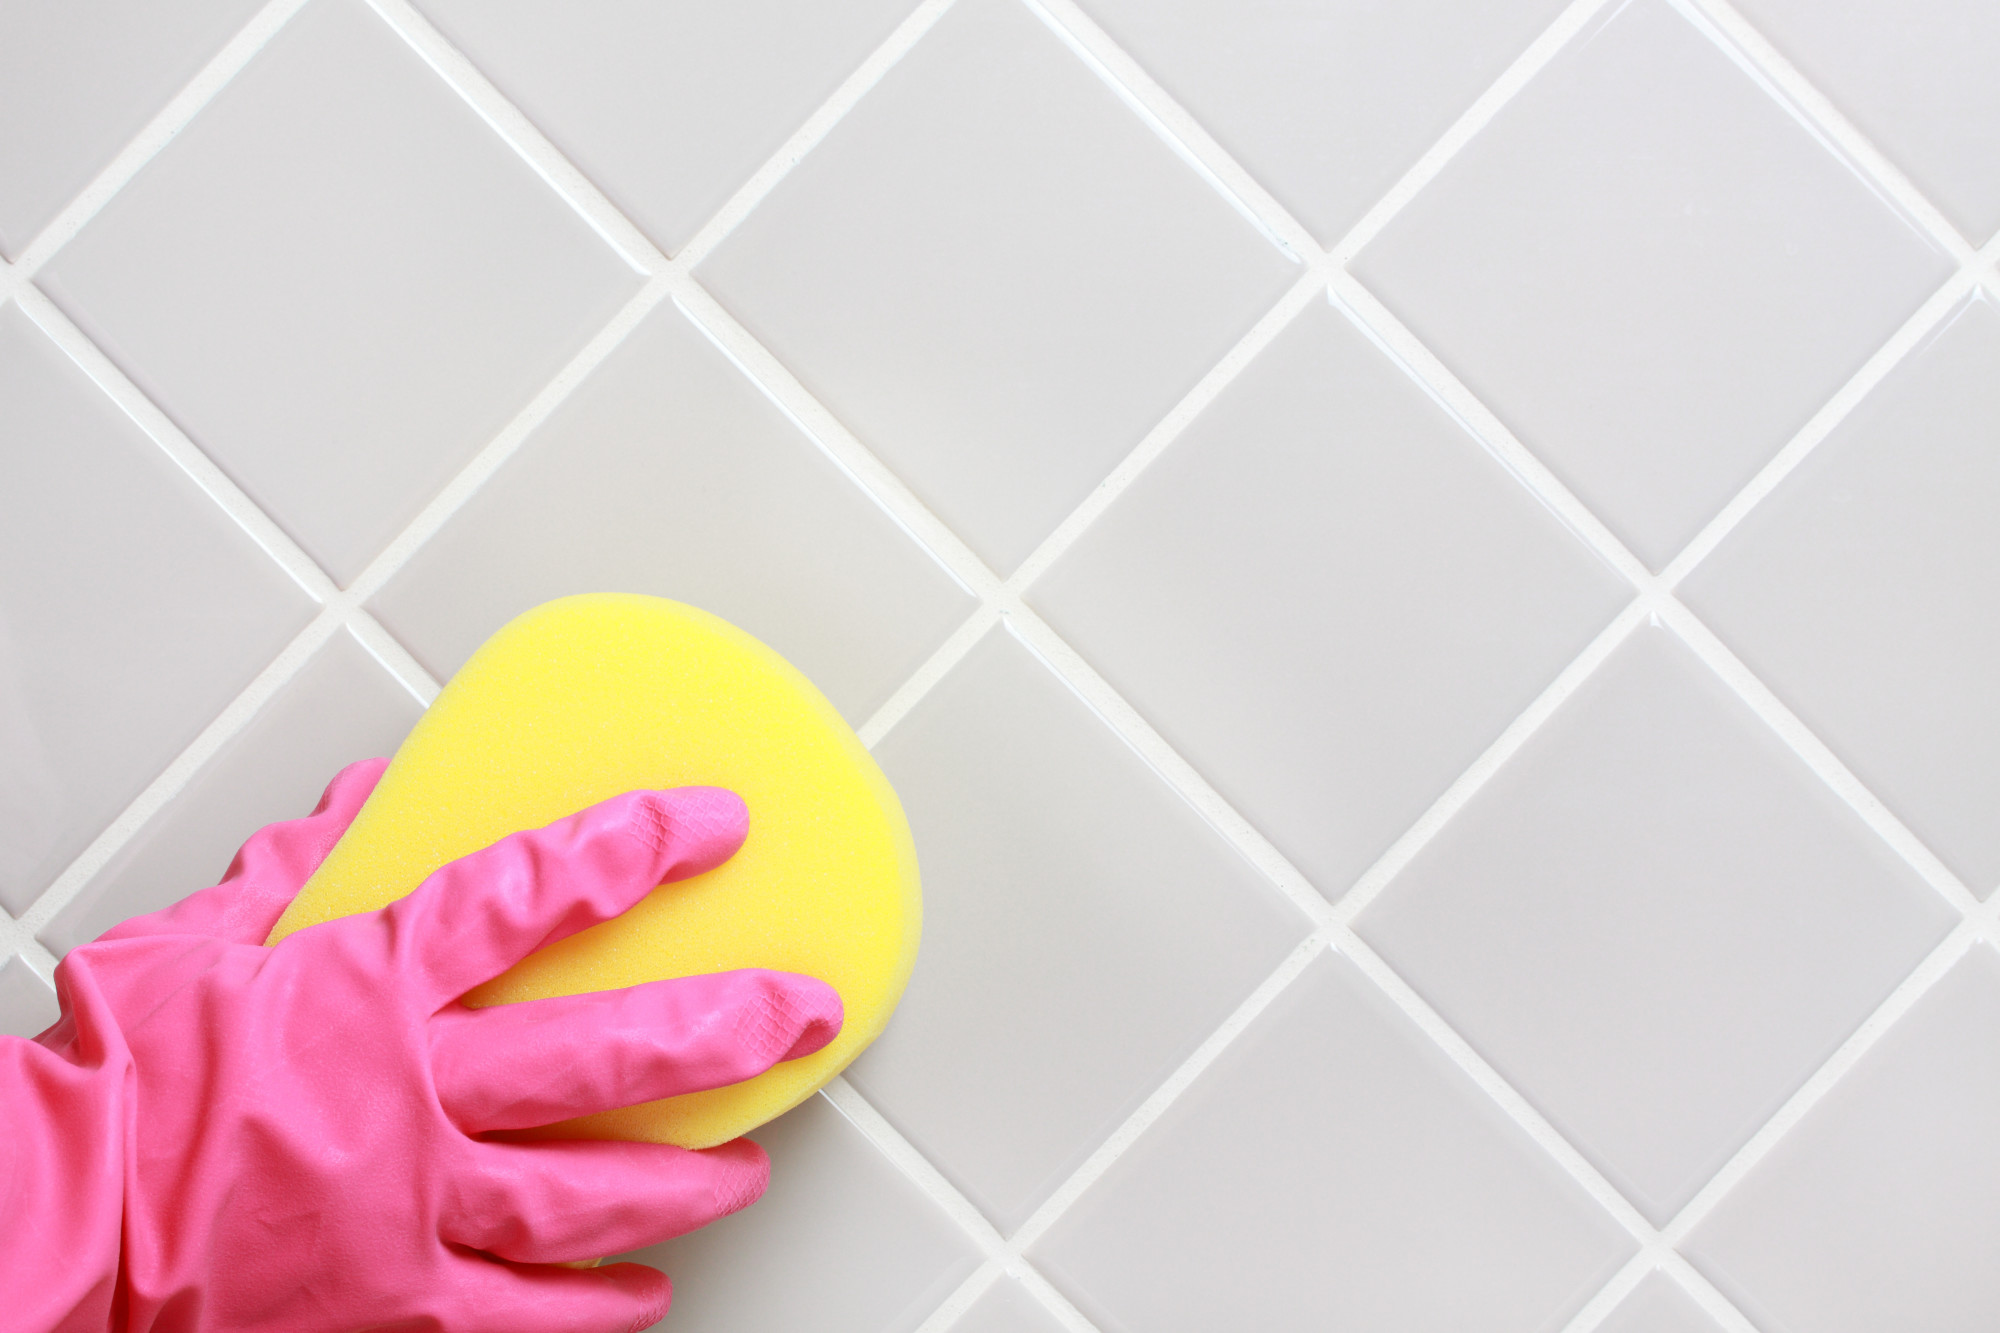 Squeaky Clean: How to Clean Bathroom Tile the Easy Way - Cleaning